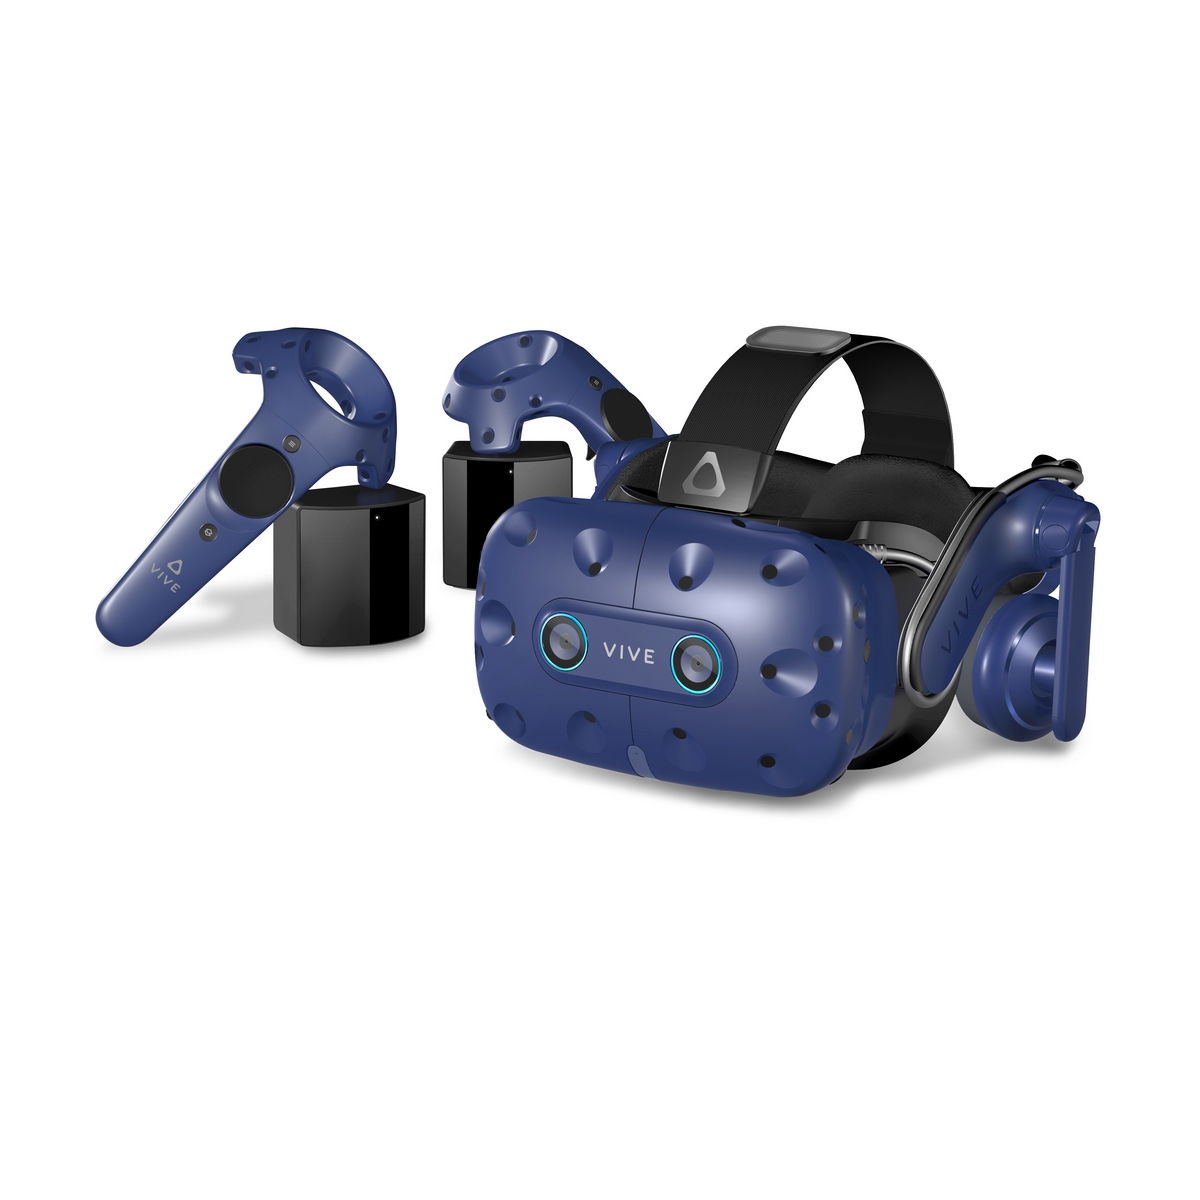 HTC - HTC VIVE PRO EYE Eye Tracking Room Scale VR Headset Bundle Including Contro